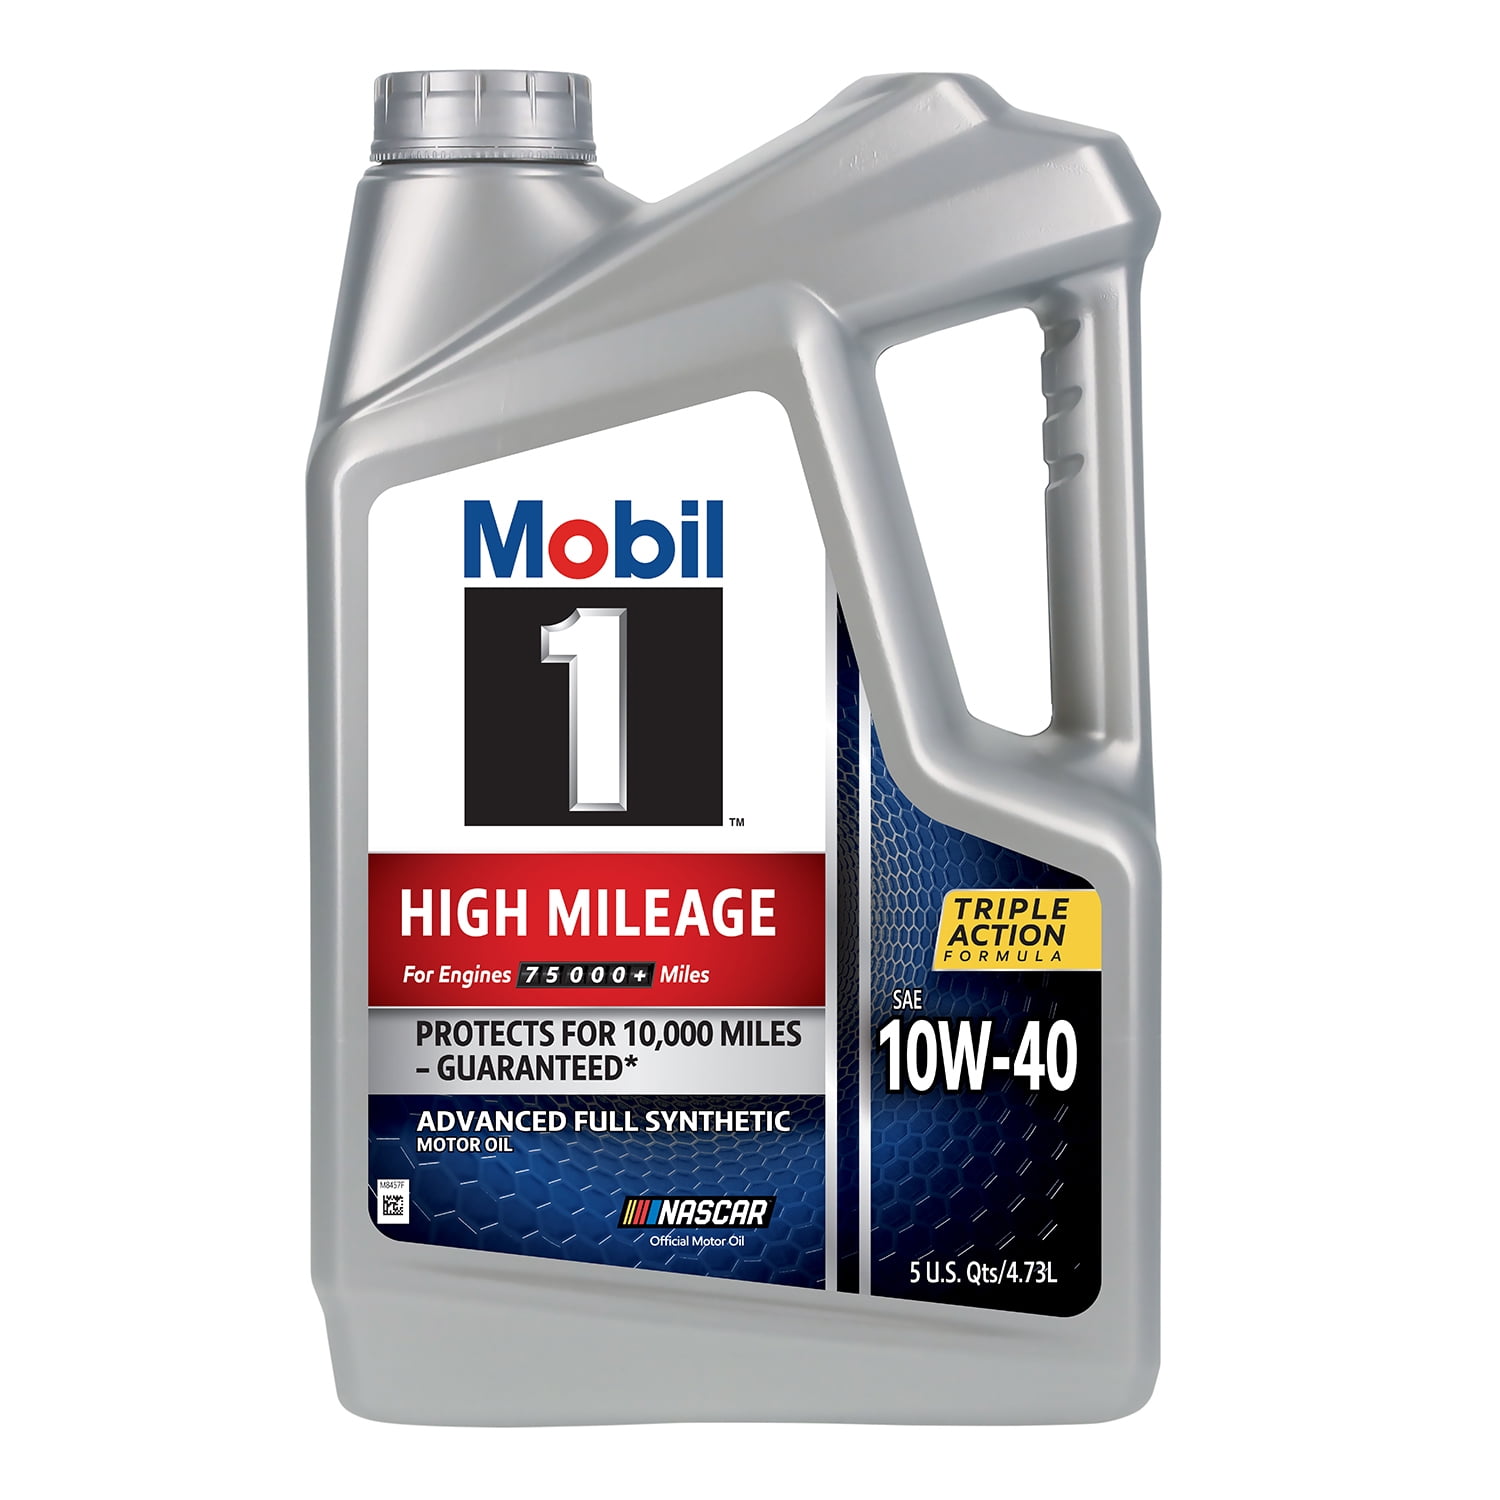 Mobil 1 High Mileage Full Synthetic Motor Oil 10W-40, 5 qt (3 Pack) - 2